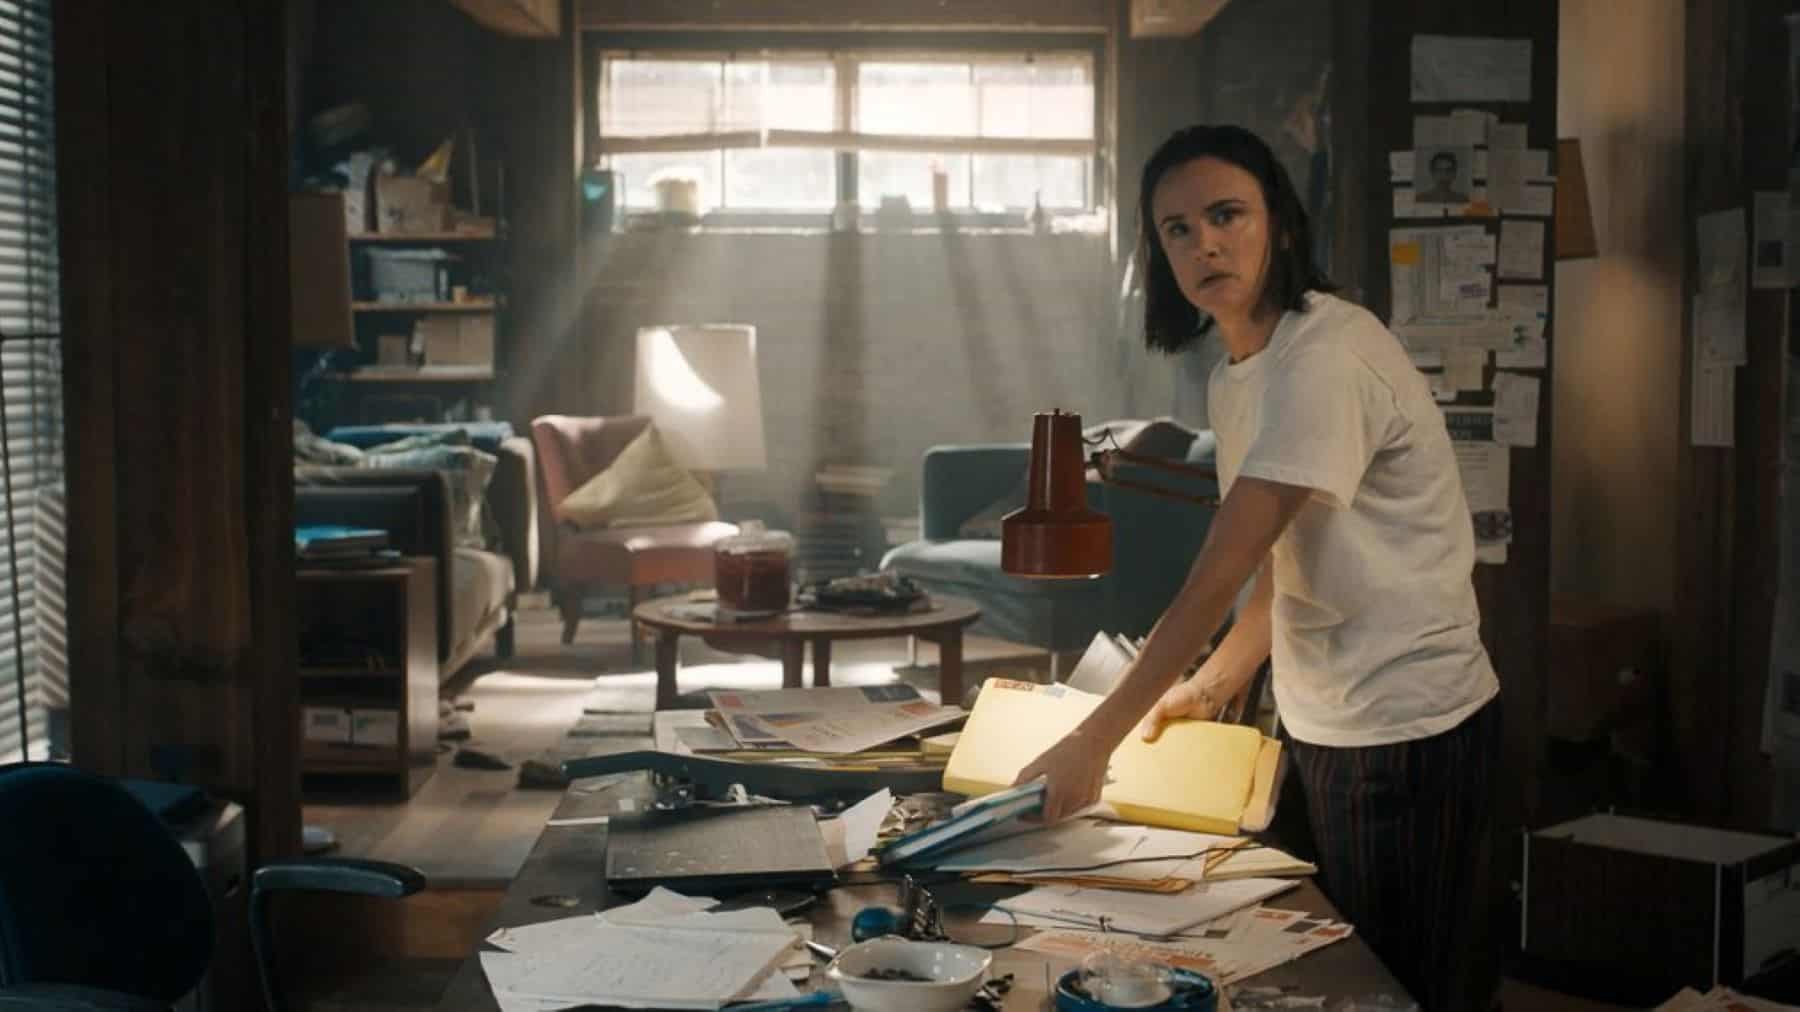 A woman stands next to a messy desk covered in papers and files in this image from Blumhouse Television.